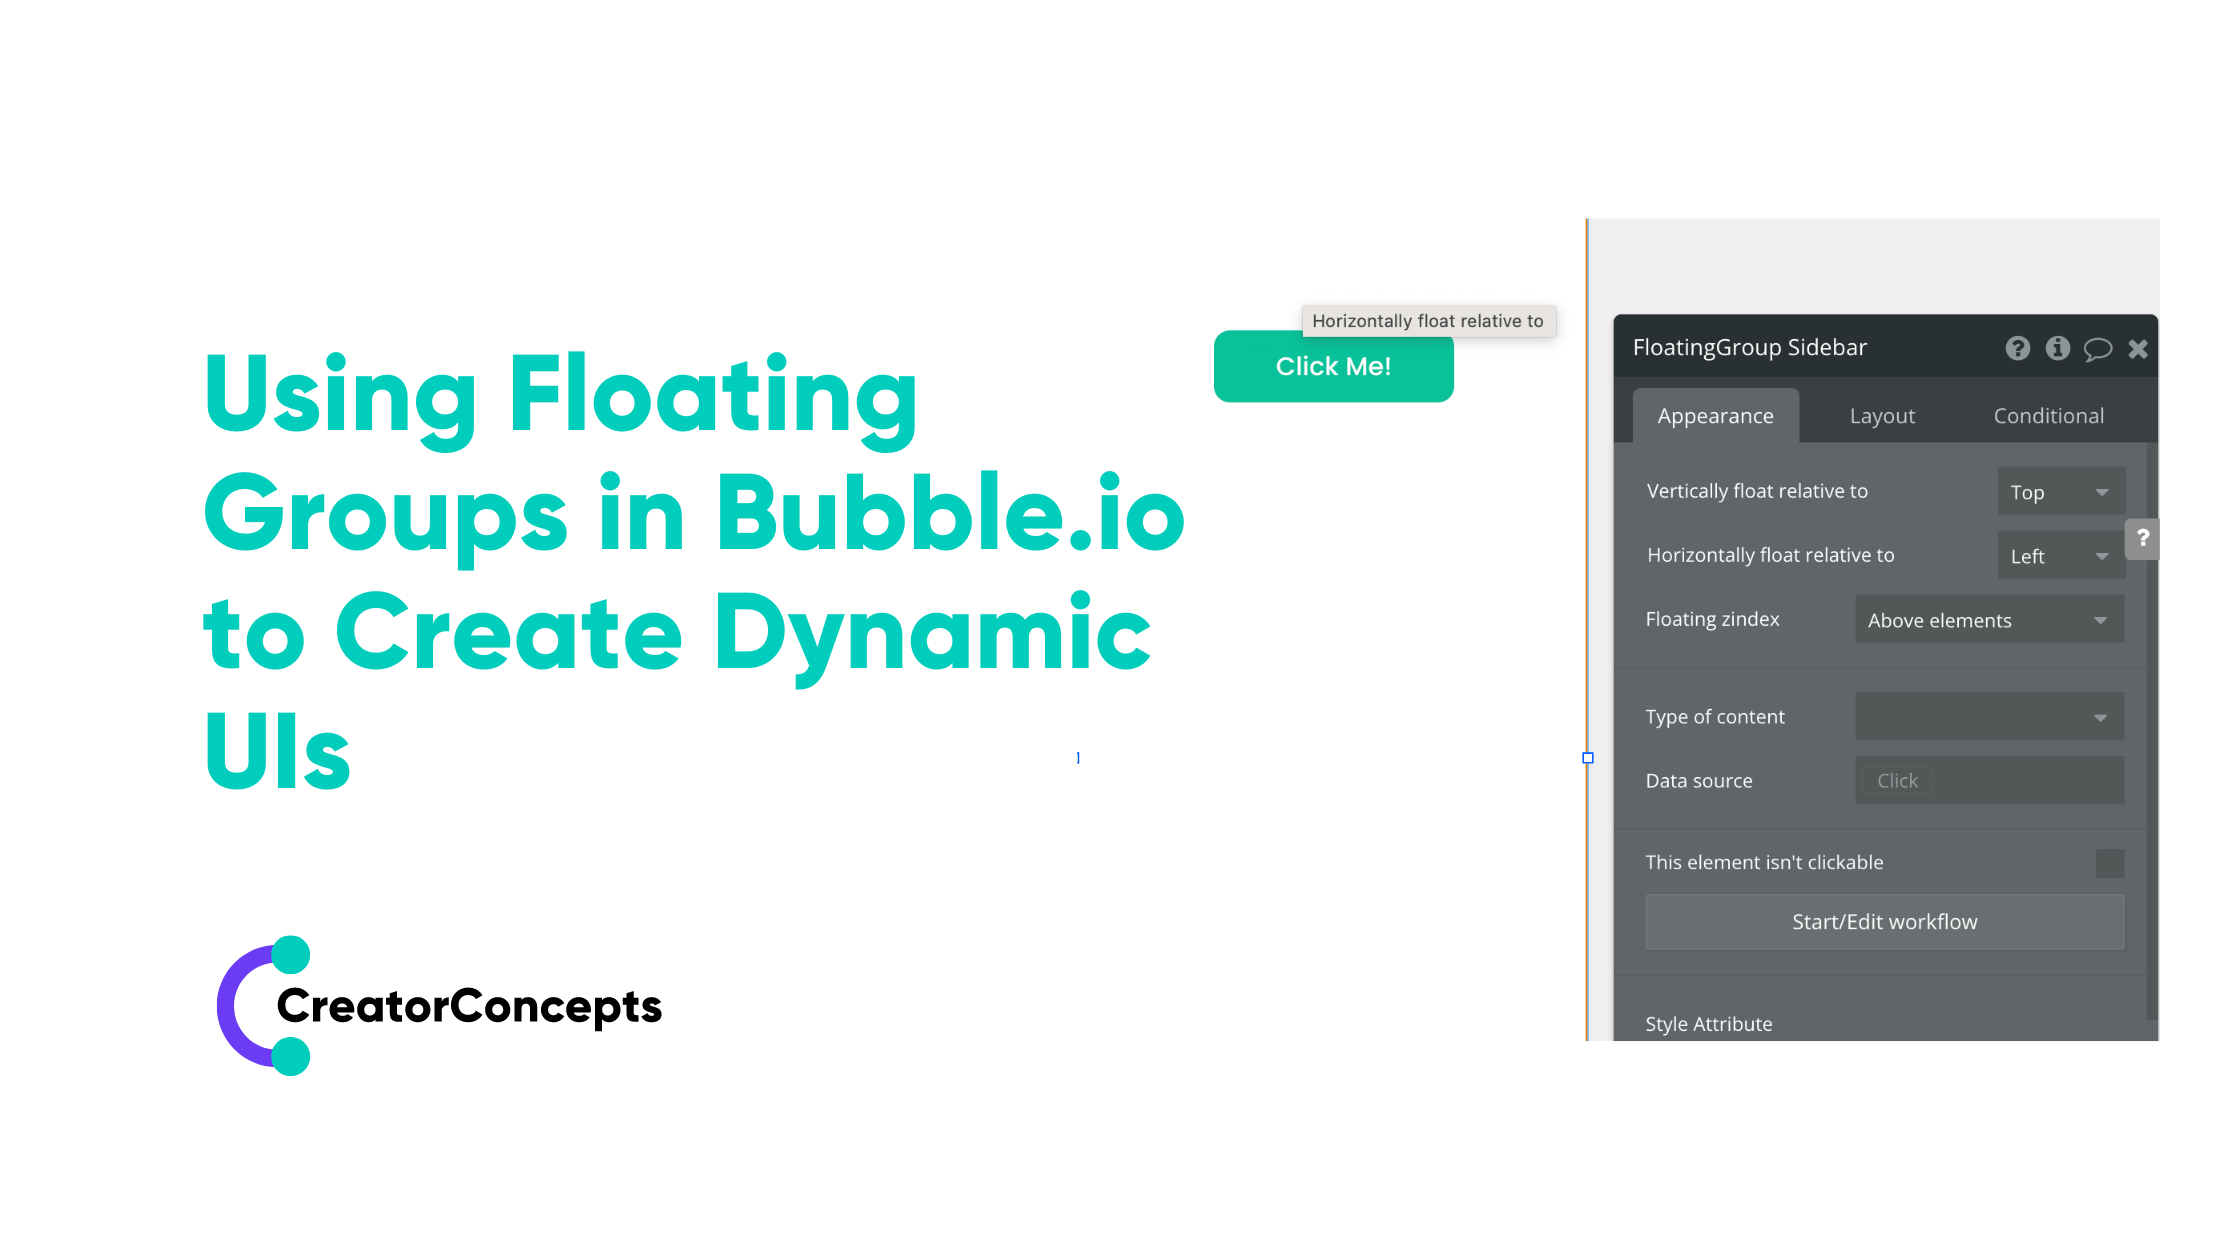 Using Floating Groups in Bubble.io to Create Dynamic User Interfaces